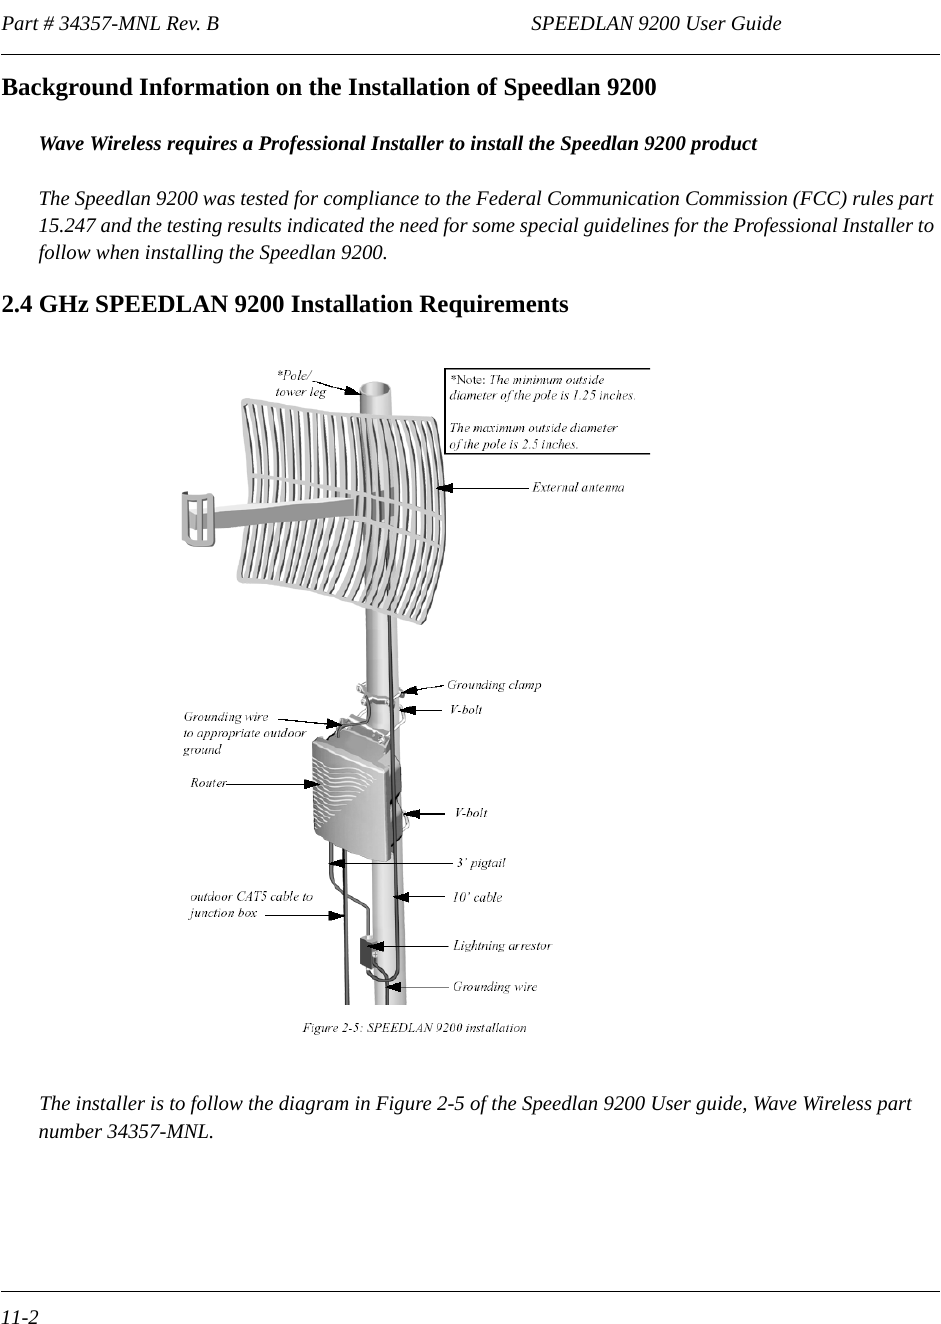 Part # 34357-MNL Rev. B                                                            SPEEDLAN 9200 User Guide 11-2Background Information on the Installation of Speedlan 9200Wave Wireless requires a Professional Installer to install the Speedlan 9200 productThe Speedlan 9200 was tested for compliance to the Federal Communication Commission (FCC) rules part 15.247 and the testing results indicated the need for some special guidelines for the Professional Installer to follow when installing the Speedlan 9200.2.4 GHz SPEEDLAN 9200 Installation RequirementsThe installer is to follow the diagram in Figure 2-5 of the Speedlan 9200 User guide, Wave Wireless part number 34357-MNL.